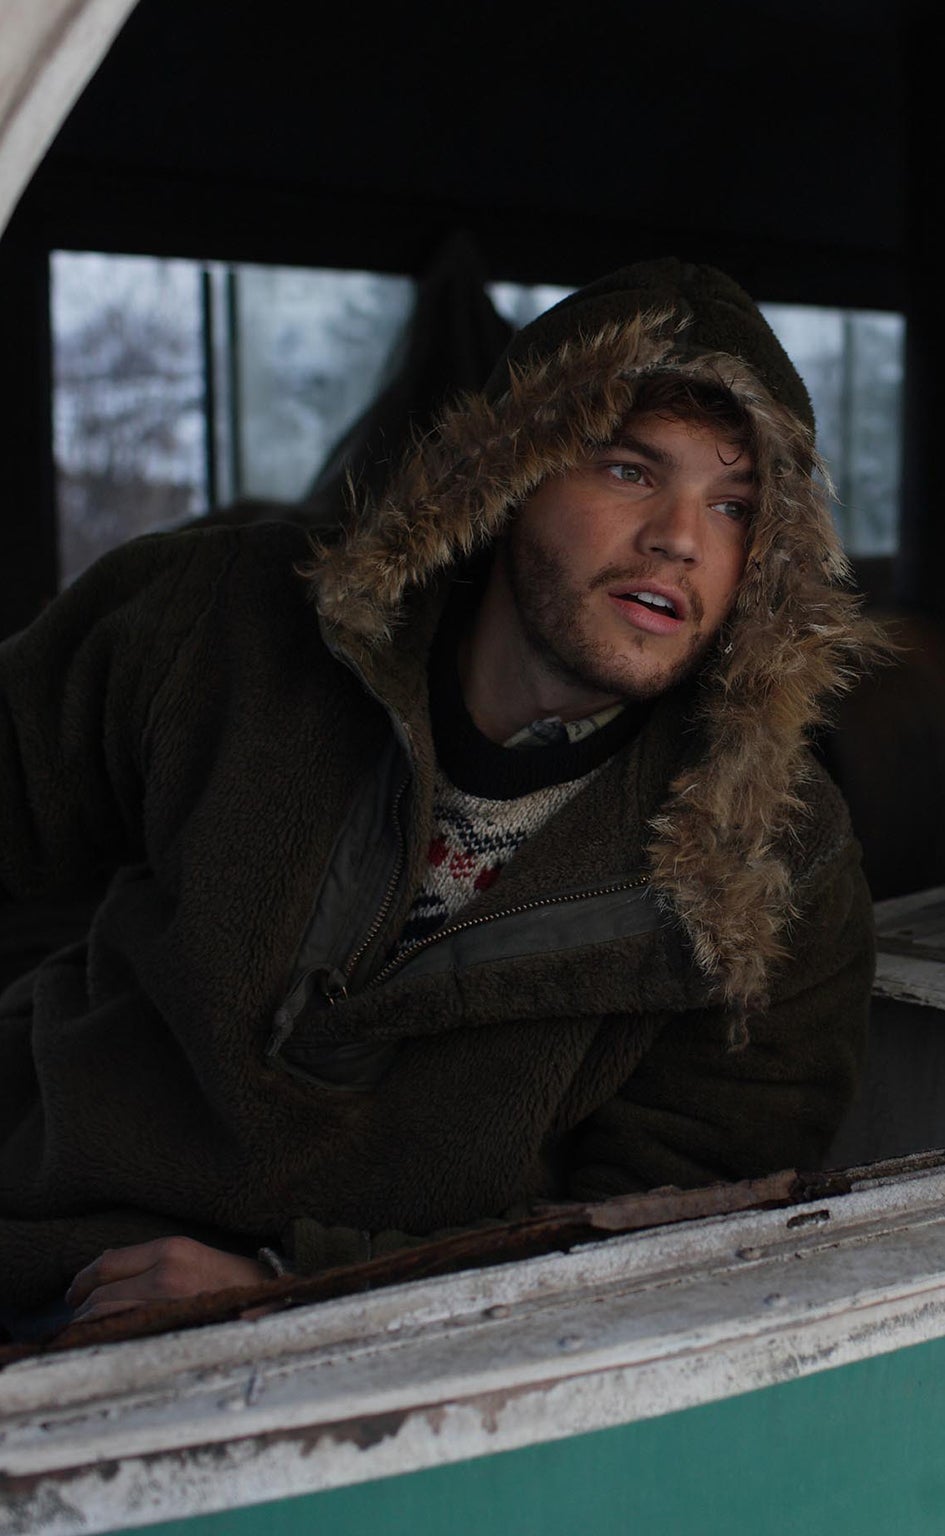 On the road: Hirsch as the late nomad Chris McCandless in 2007’s ‘Into the Wild’